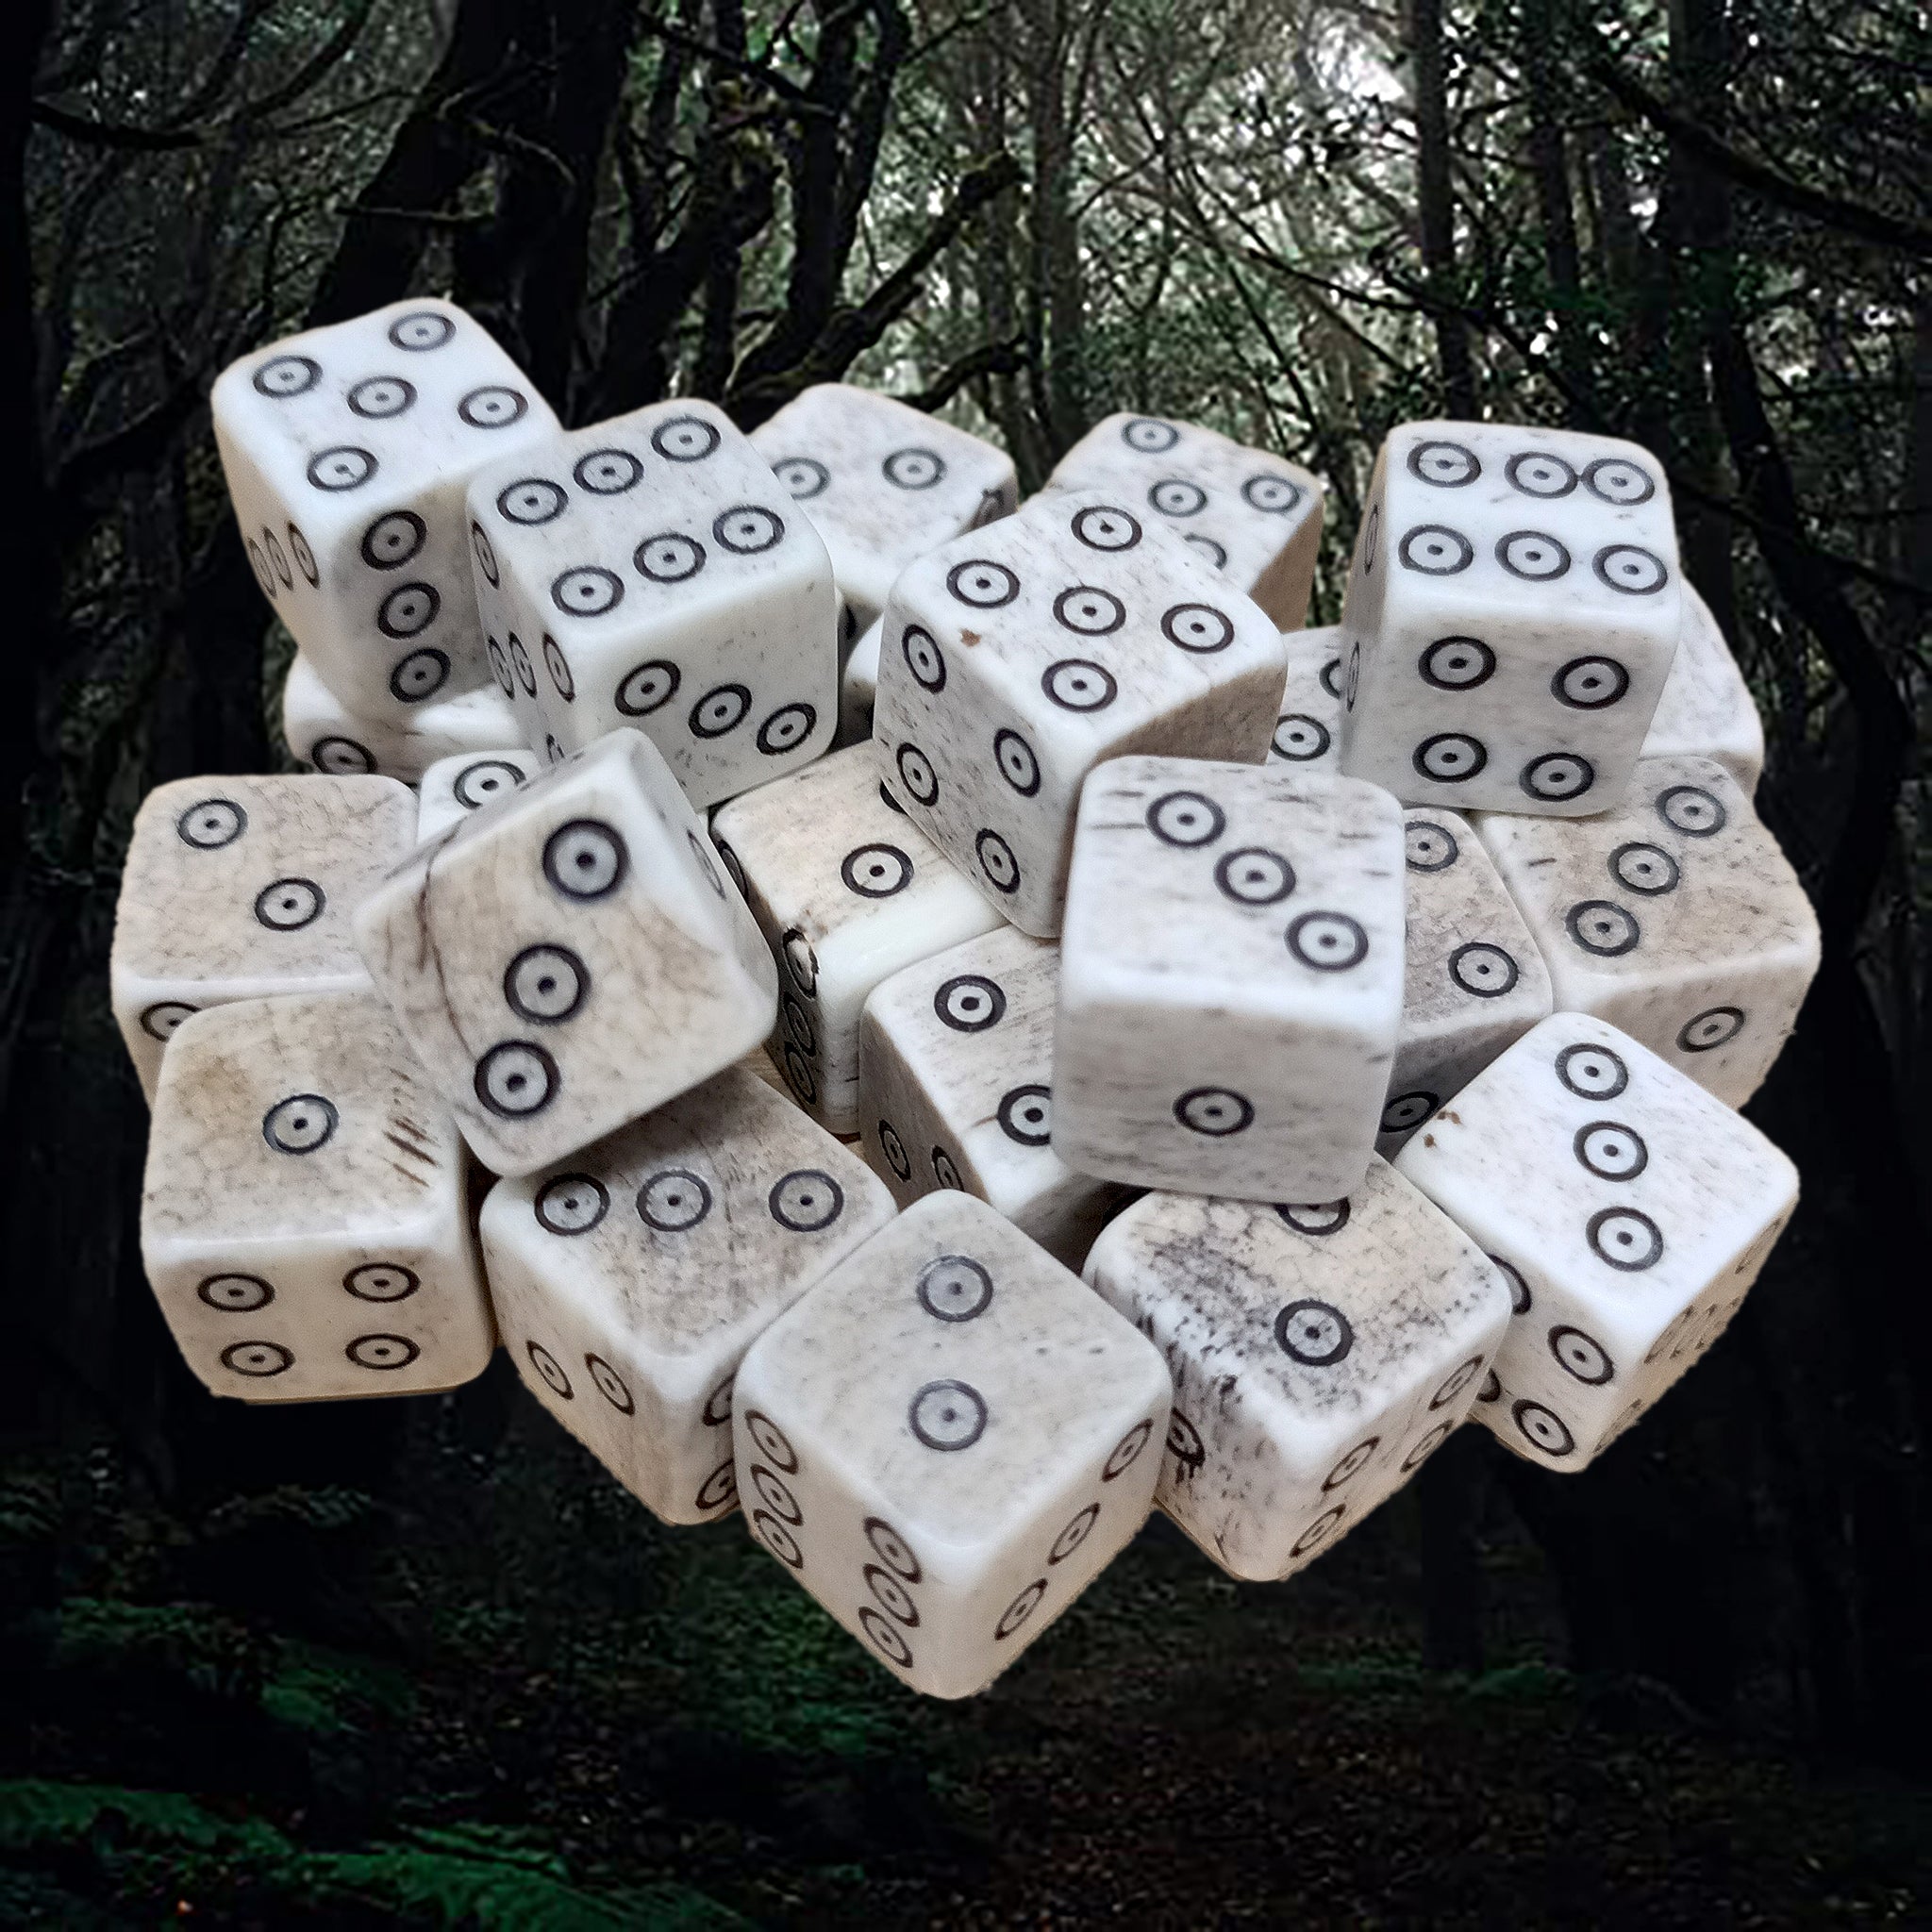 Large Size Cow Bone Dice Replicas with Hand-Carved Dot & Ring Spots